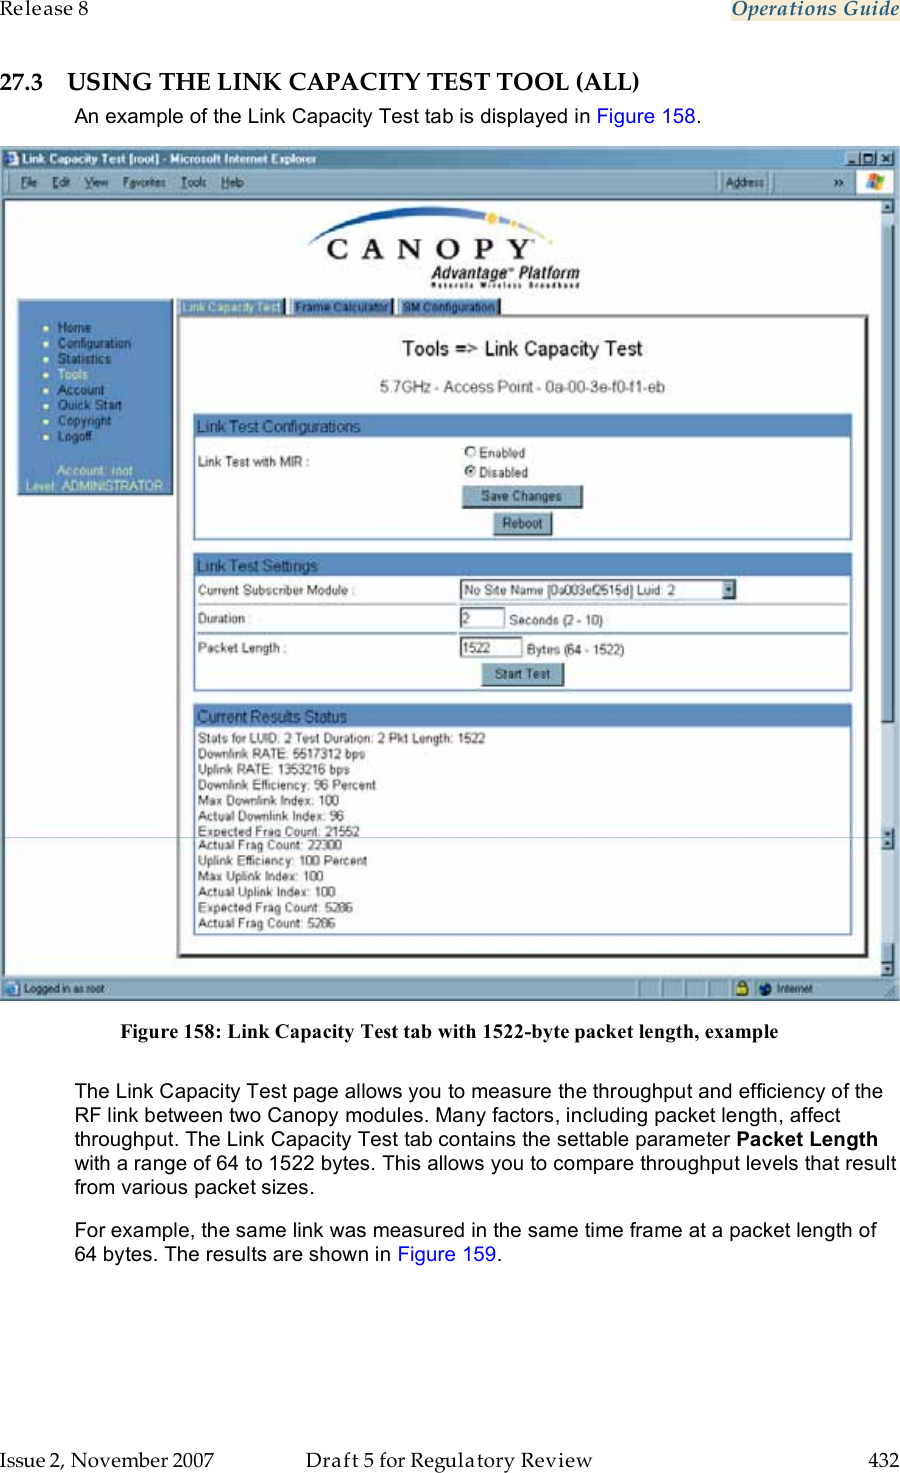 Release 8    Operations Guide   Issue 2, November 2007  Draft 5 for Regulatory Review  432     27.3 USING THE LINK CAPACITY TEST TOOL (ALL) An example of the Link Capacity Test tab is displayed in Figure 158.  Figure 158: Link Capacity Test tab with 1522-byte packet length, example  The Link Capacity Test page allows you to measure the throughput and efficiency of the RF link between two Canopy modules. Many factors, including packet length, affect throughput. The Link Capacity Test tab contains the settable parameter Packet Length with a range of 64 to 1522 bytes. This allows you to compare throughput levels that result from various packet sizes. For example, the same link was measured in the same time frame at a packet length of 64 bytes. The results are shown in Figure 159. 